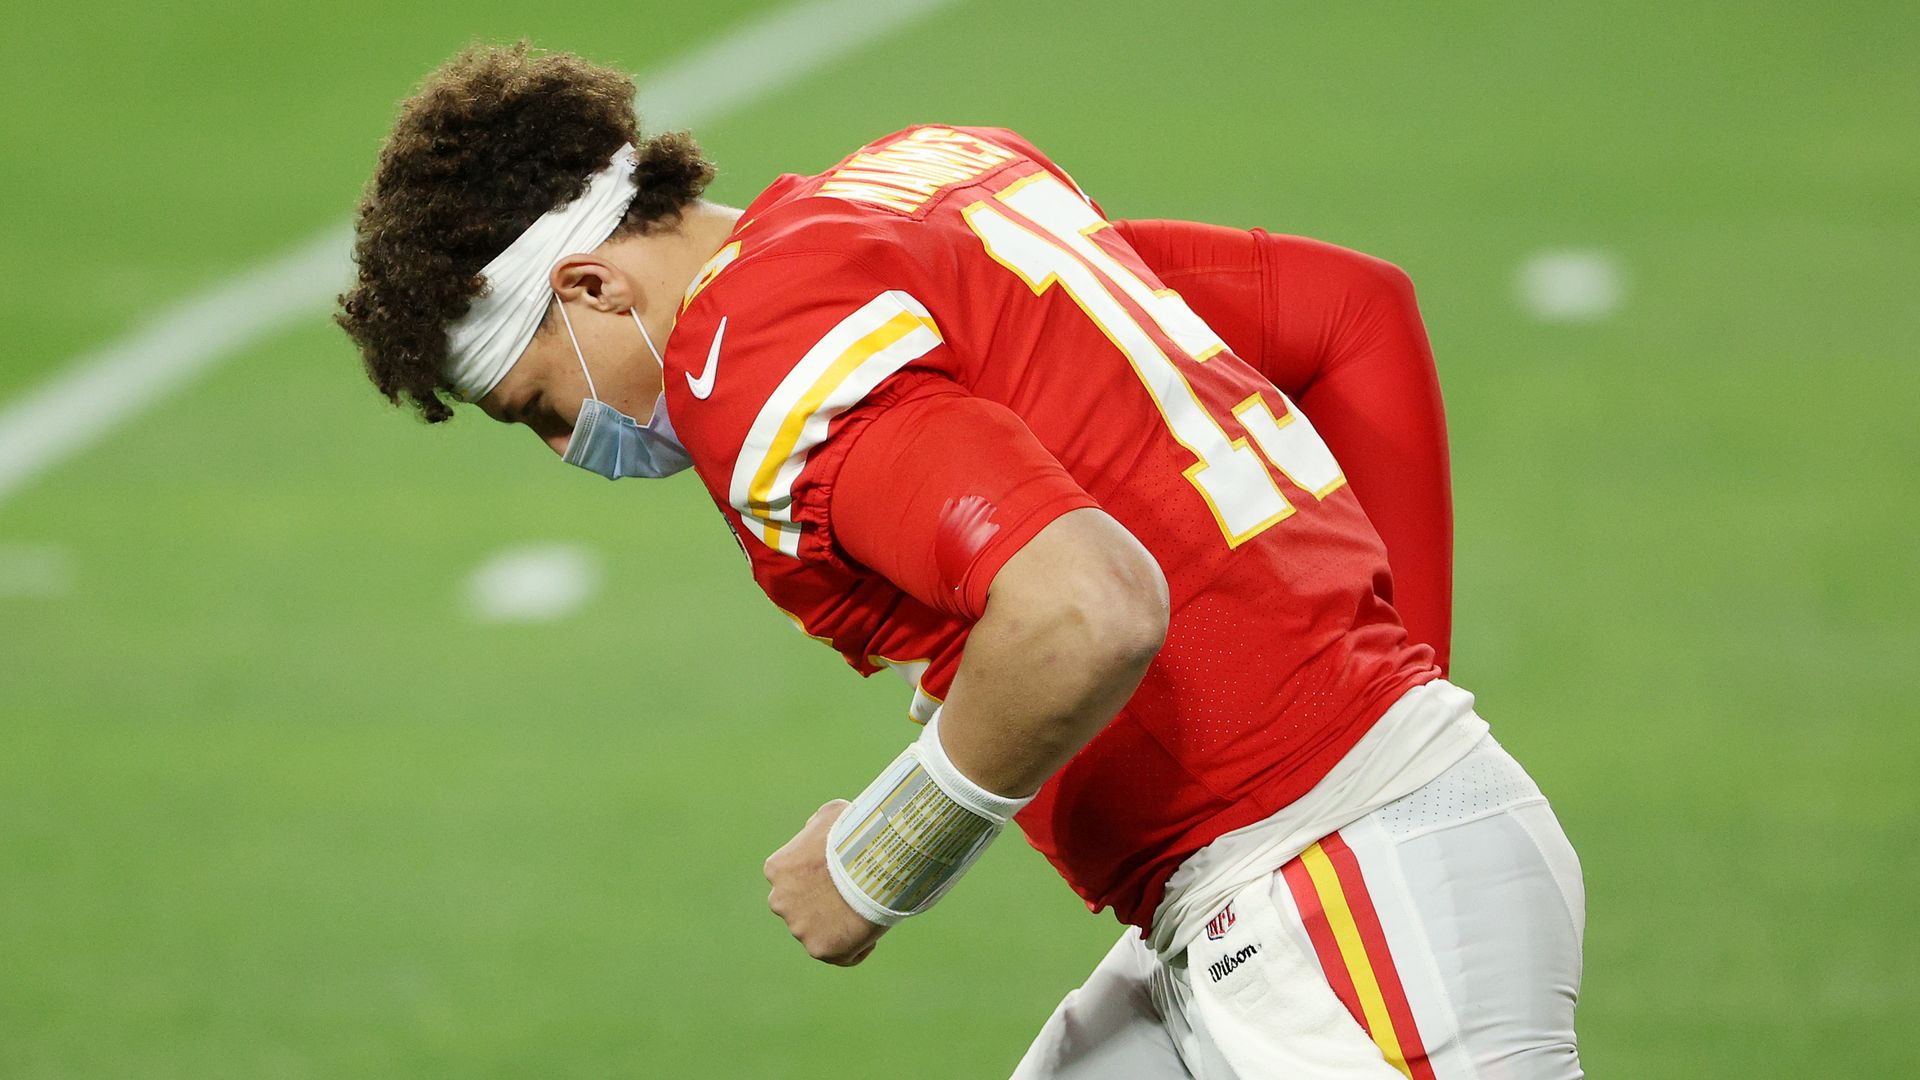 Patrick Mahomes #15 of the Kansas City Chiefs wears a facemask while preparing for the start of Super Bowl LV against the Tampa Bay Buccaneers 